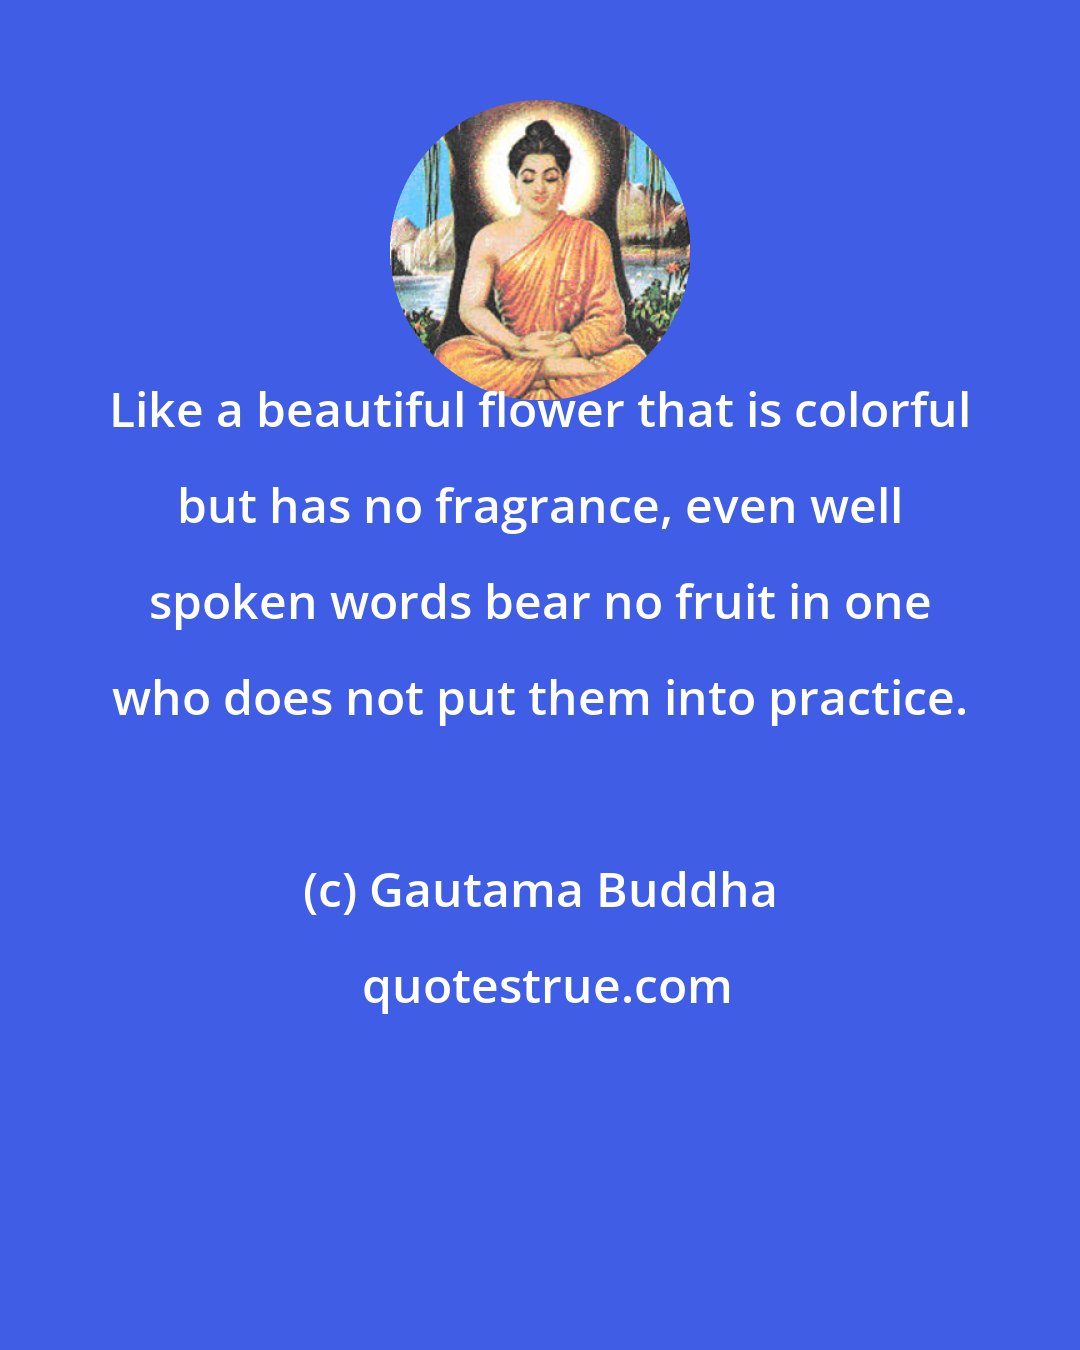 Gautama Buddha: Like a beautiful flower that is colorful but has no fragrance, even well spoken words bear no fruit in one who does not put them into practice.